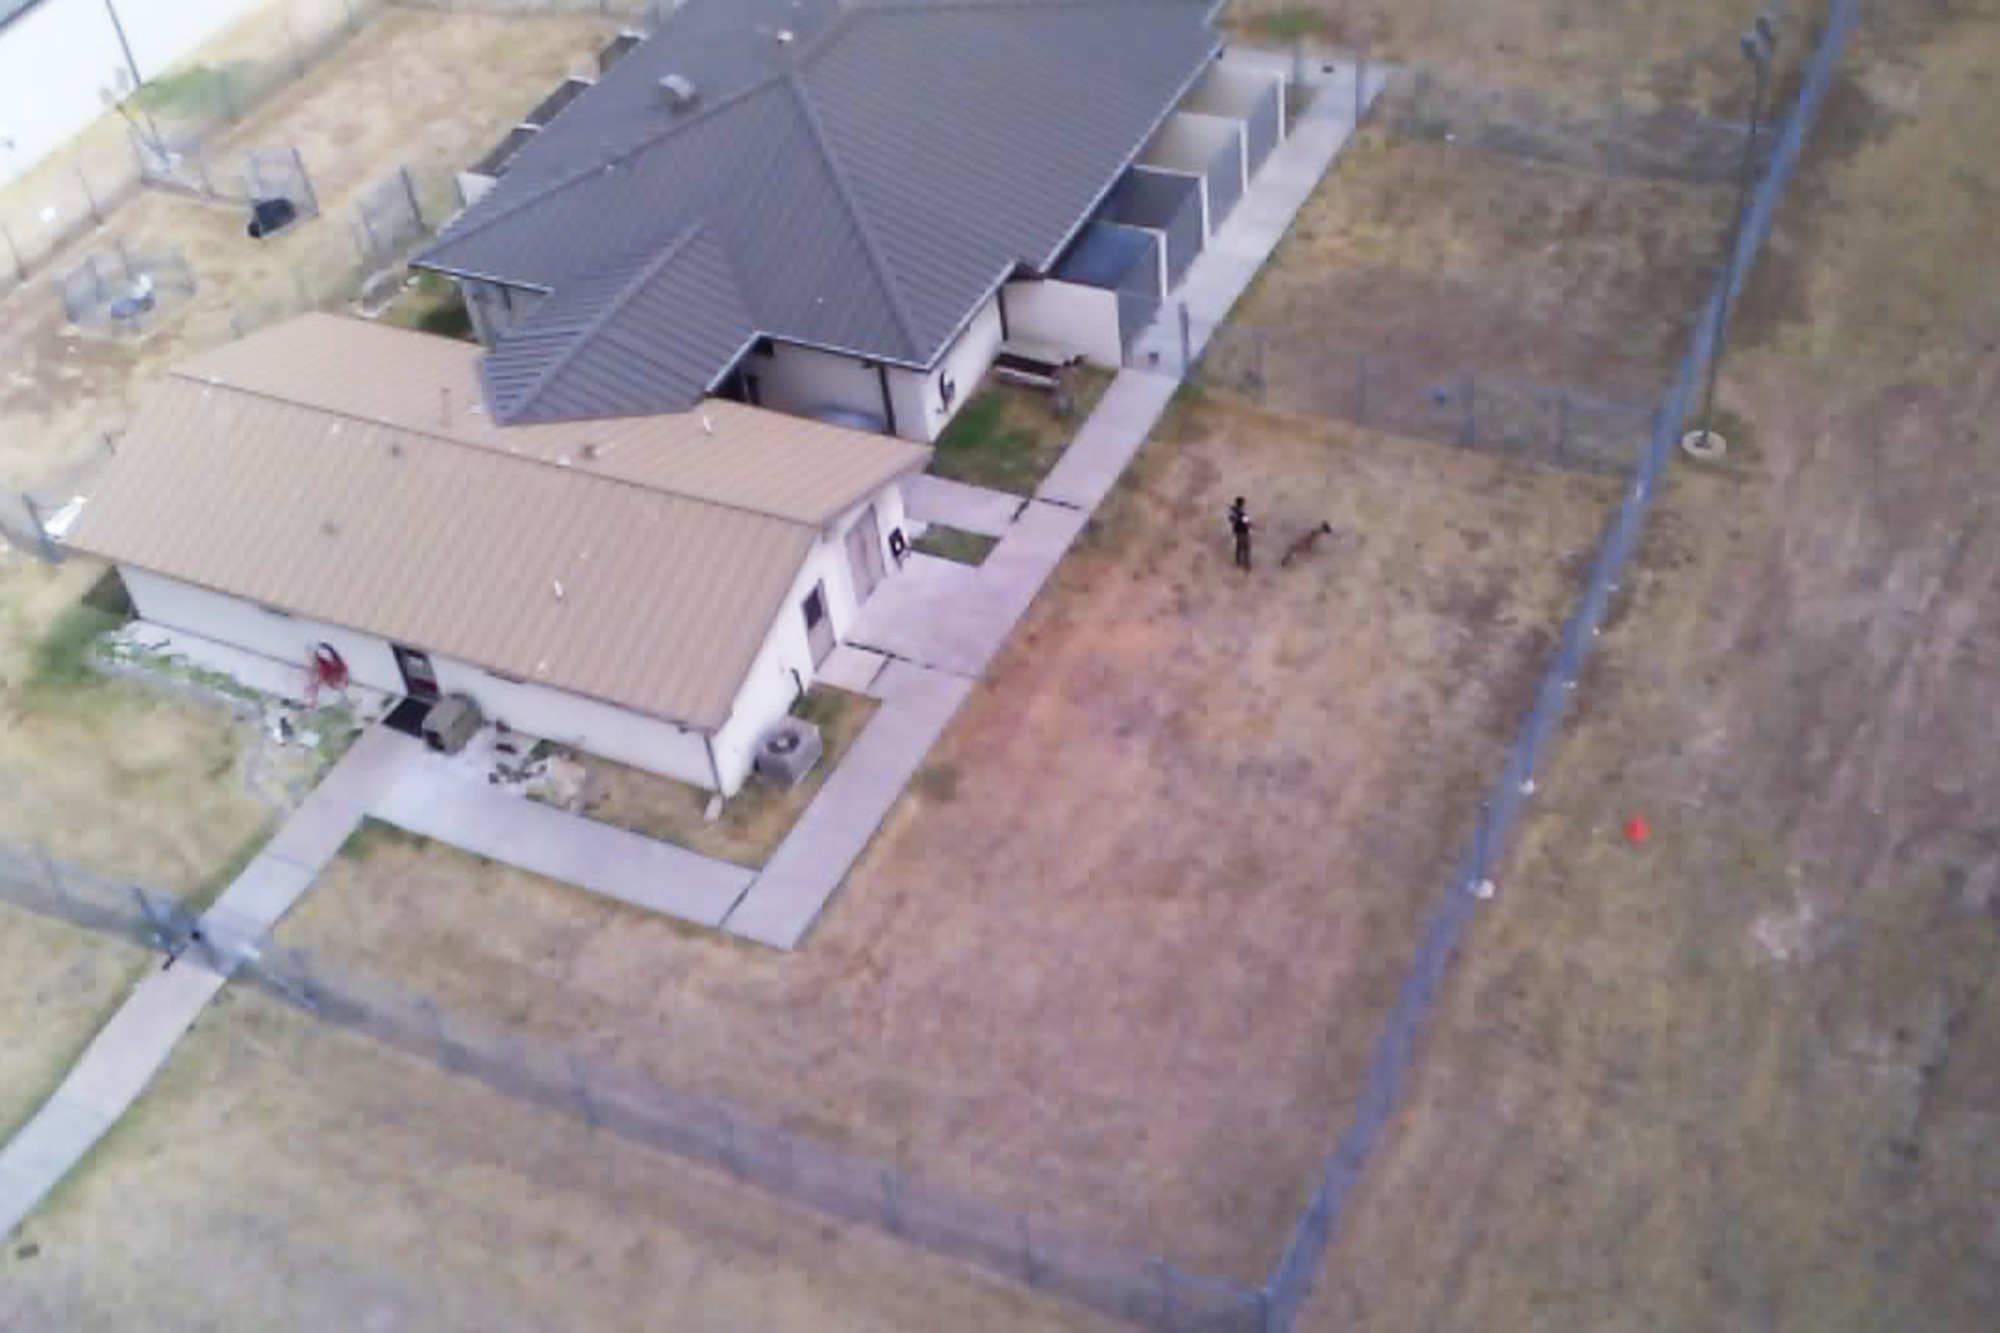 A 17th Security Force Squadron Small Unmanned Aircraft System photo of the Fritz Military Working Dog Kennel on Goodfellow Air Force Base, Texas, September 8, 2020. Drones provided a stand-off distance for possible hostile incidents or active shooters, and created a force multiplier in physical security, search and rescue missions, and other situations beyond human endurance. (U.S. Air Force Small Unmanned Aircraft System courtesy photo)